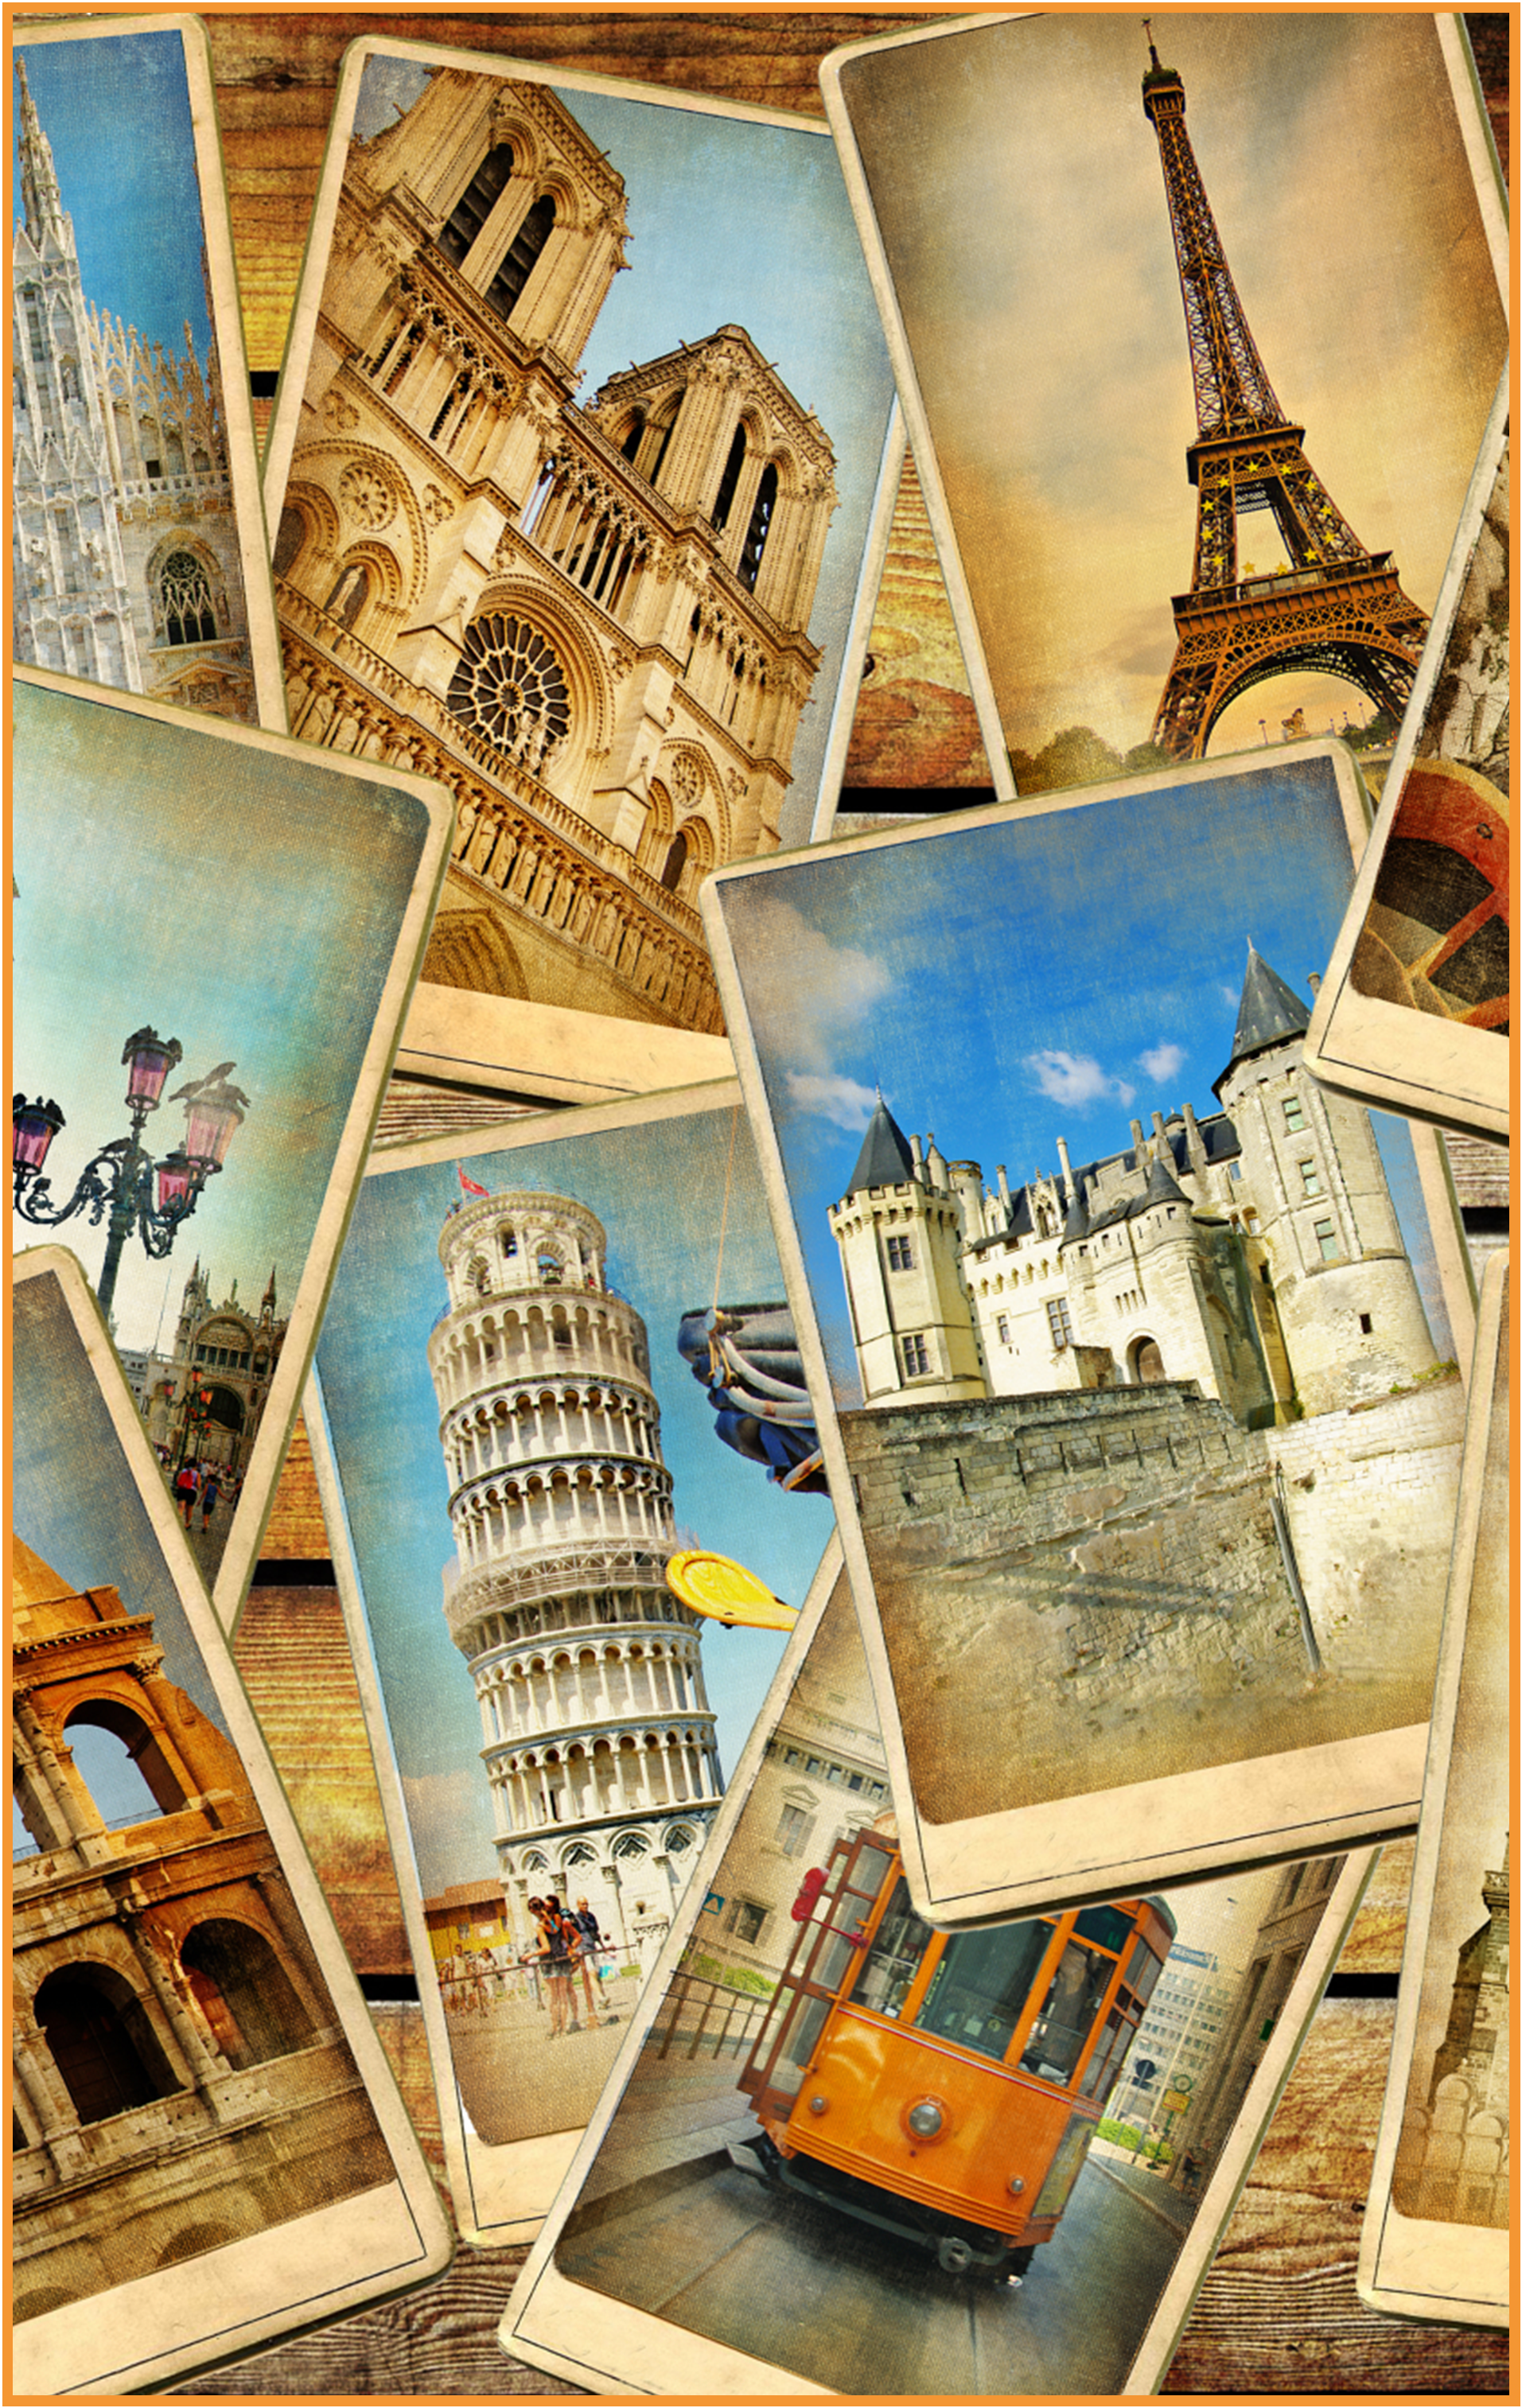 A collage of vintage color postcards depicting various sites, including the Eiffel Tower and the leaning Tower of Pisa, 